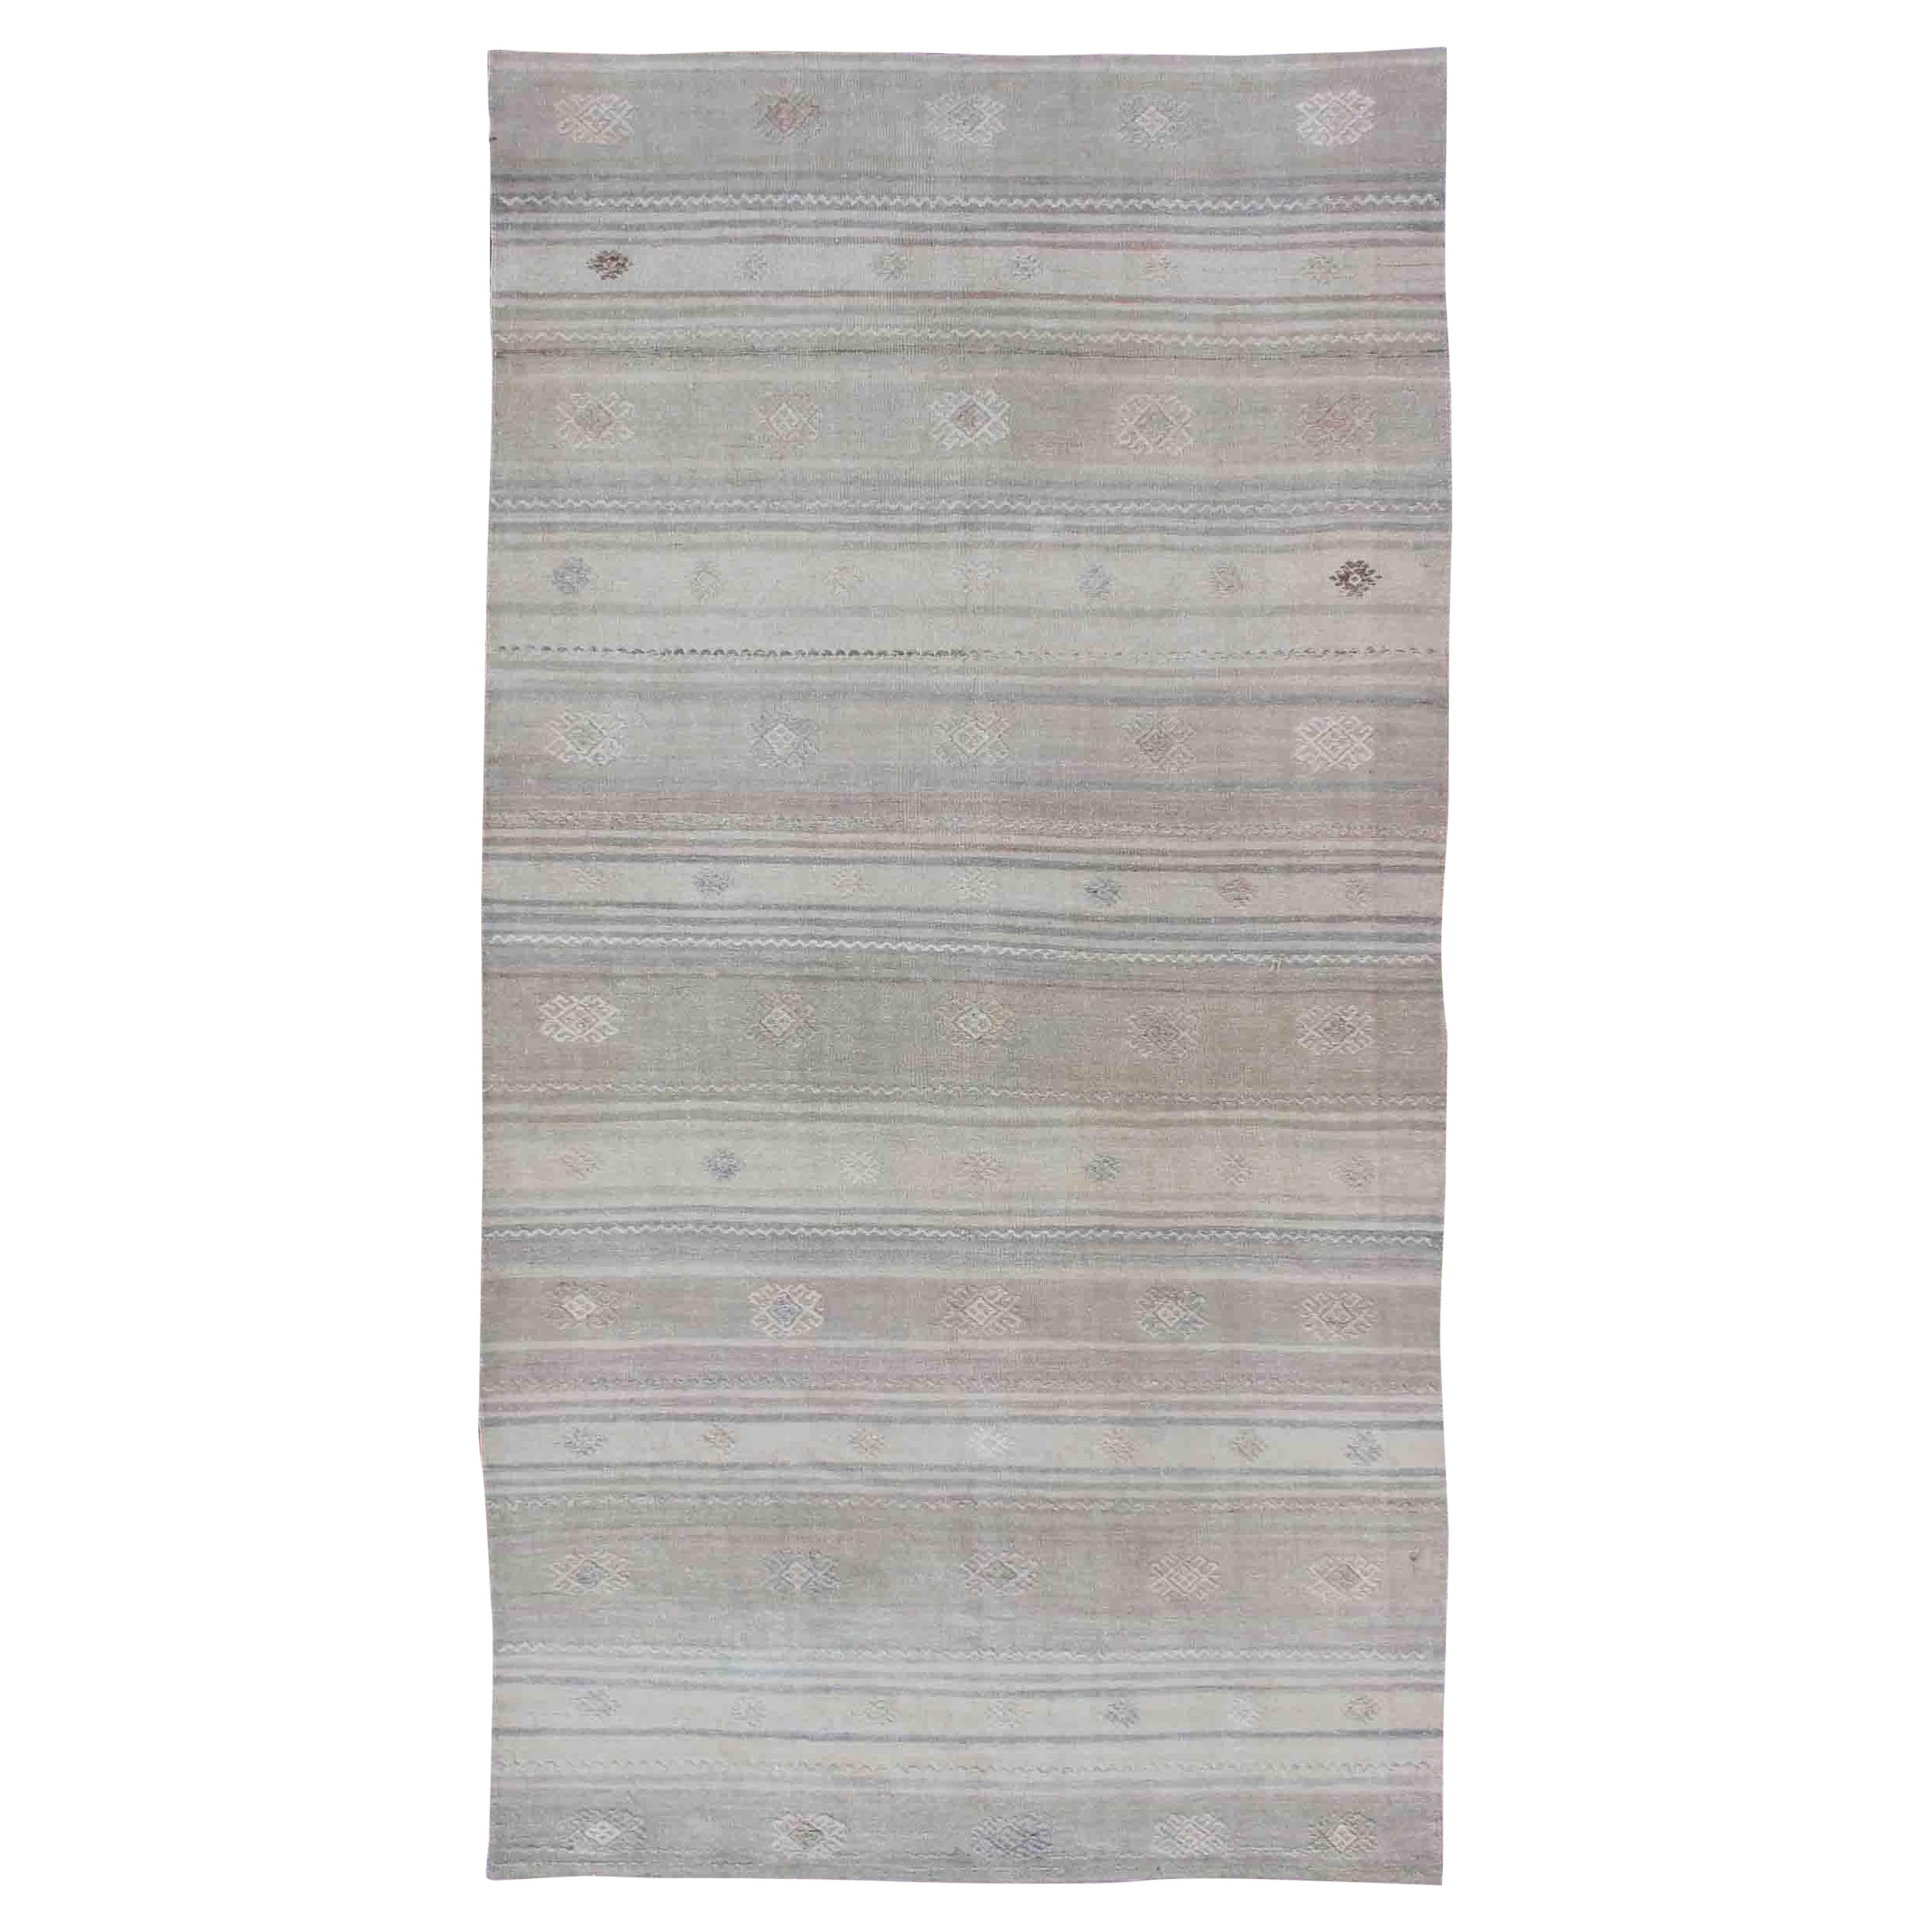 Vintage Hand Woven Turkish Kilim Runner With Stripes in Gray and Natural Tones